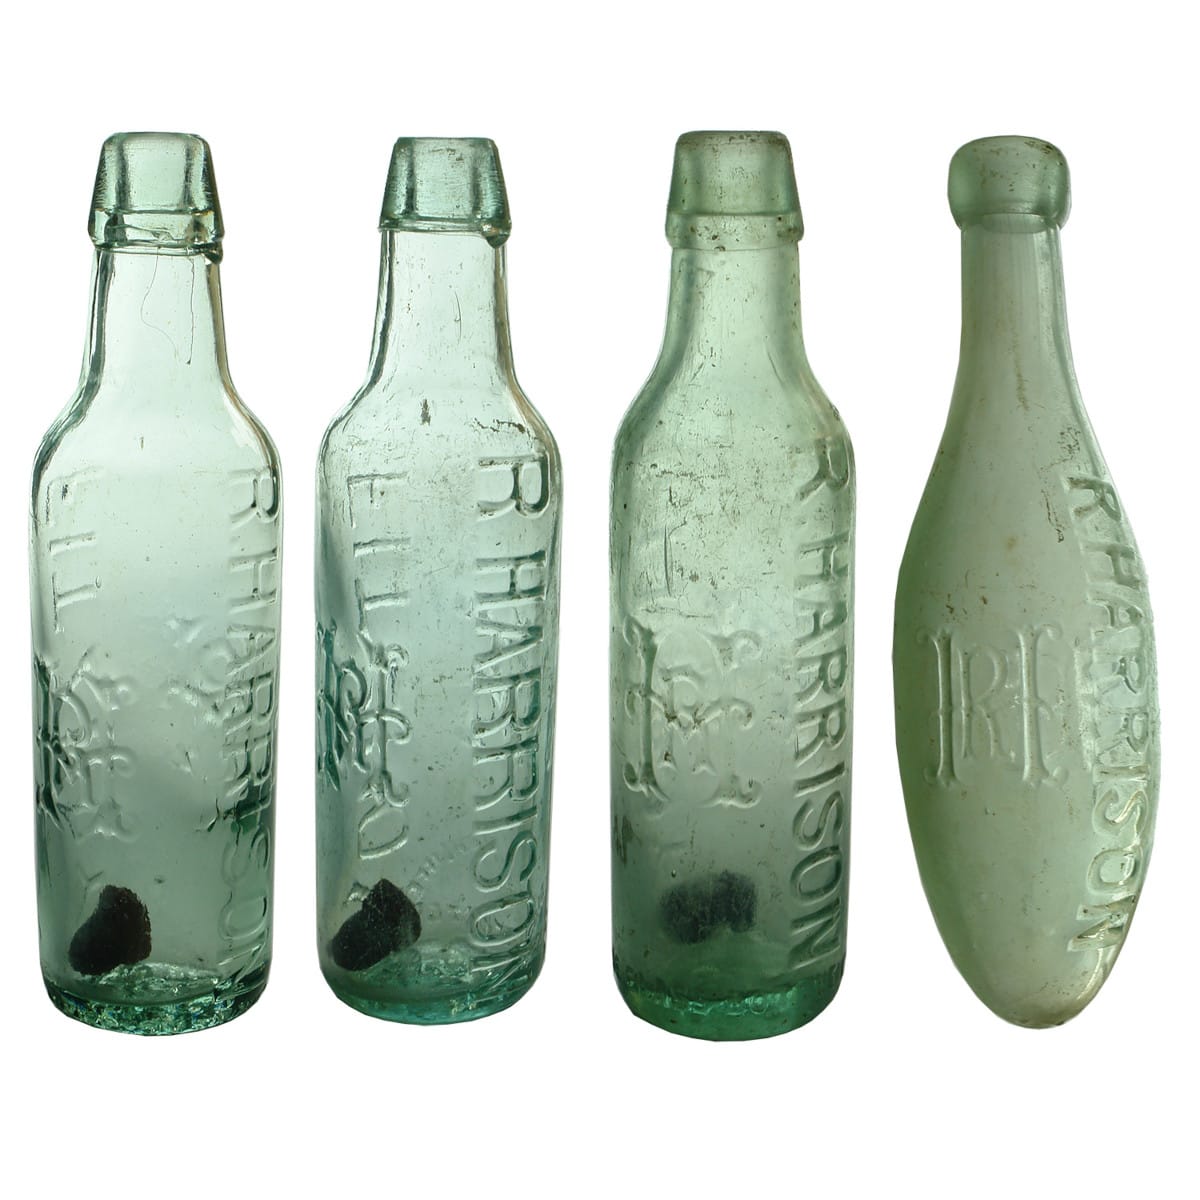 4 R. Harrison Fitzroy Bottles 3 different Lamonts - Cannington Shaw; Bratby & Hinchcliffe; Melbourne Glass Bottle Co. and a Torpedo. (Victoria)